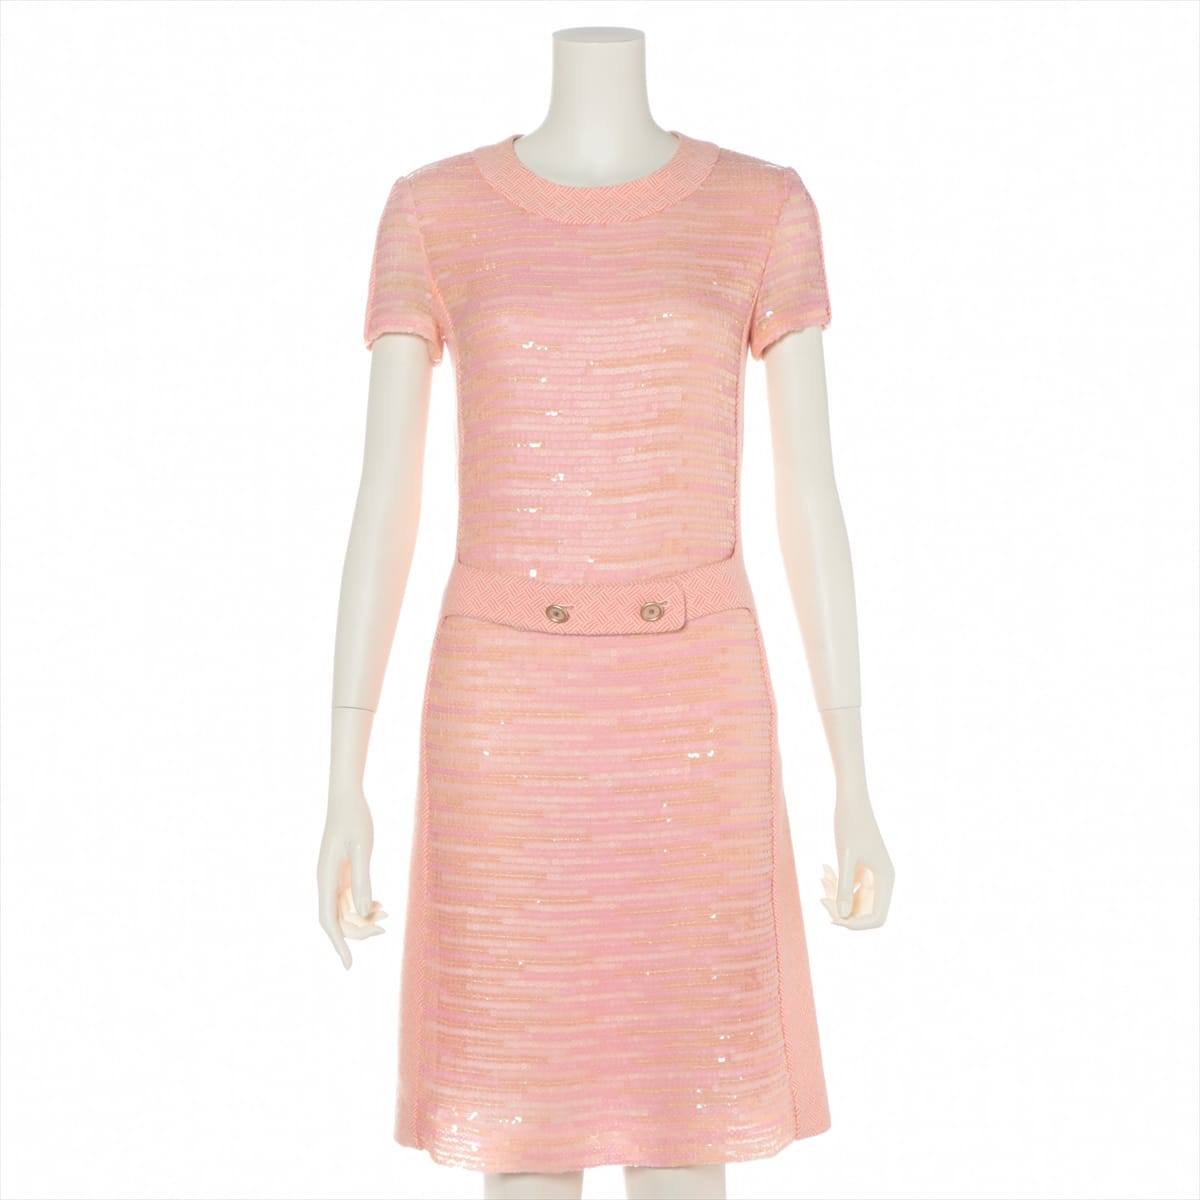 Chanel Coco Button 01A Sequins Dress 38 Ladies' Pink  There are spots on the armpits